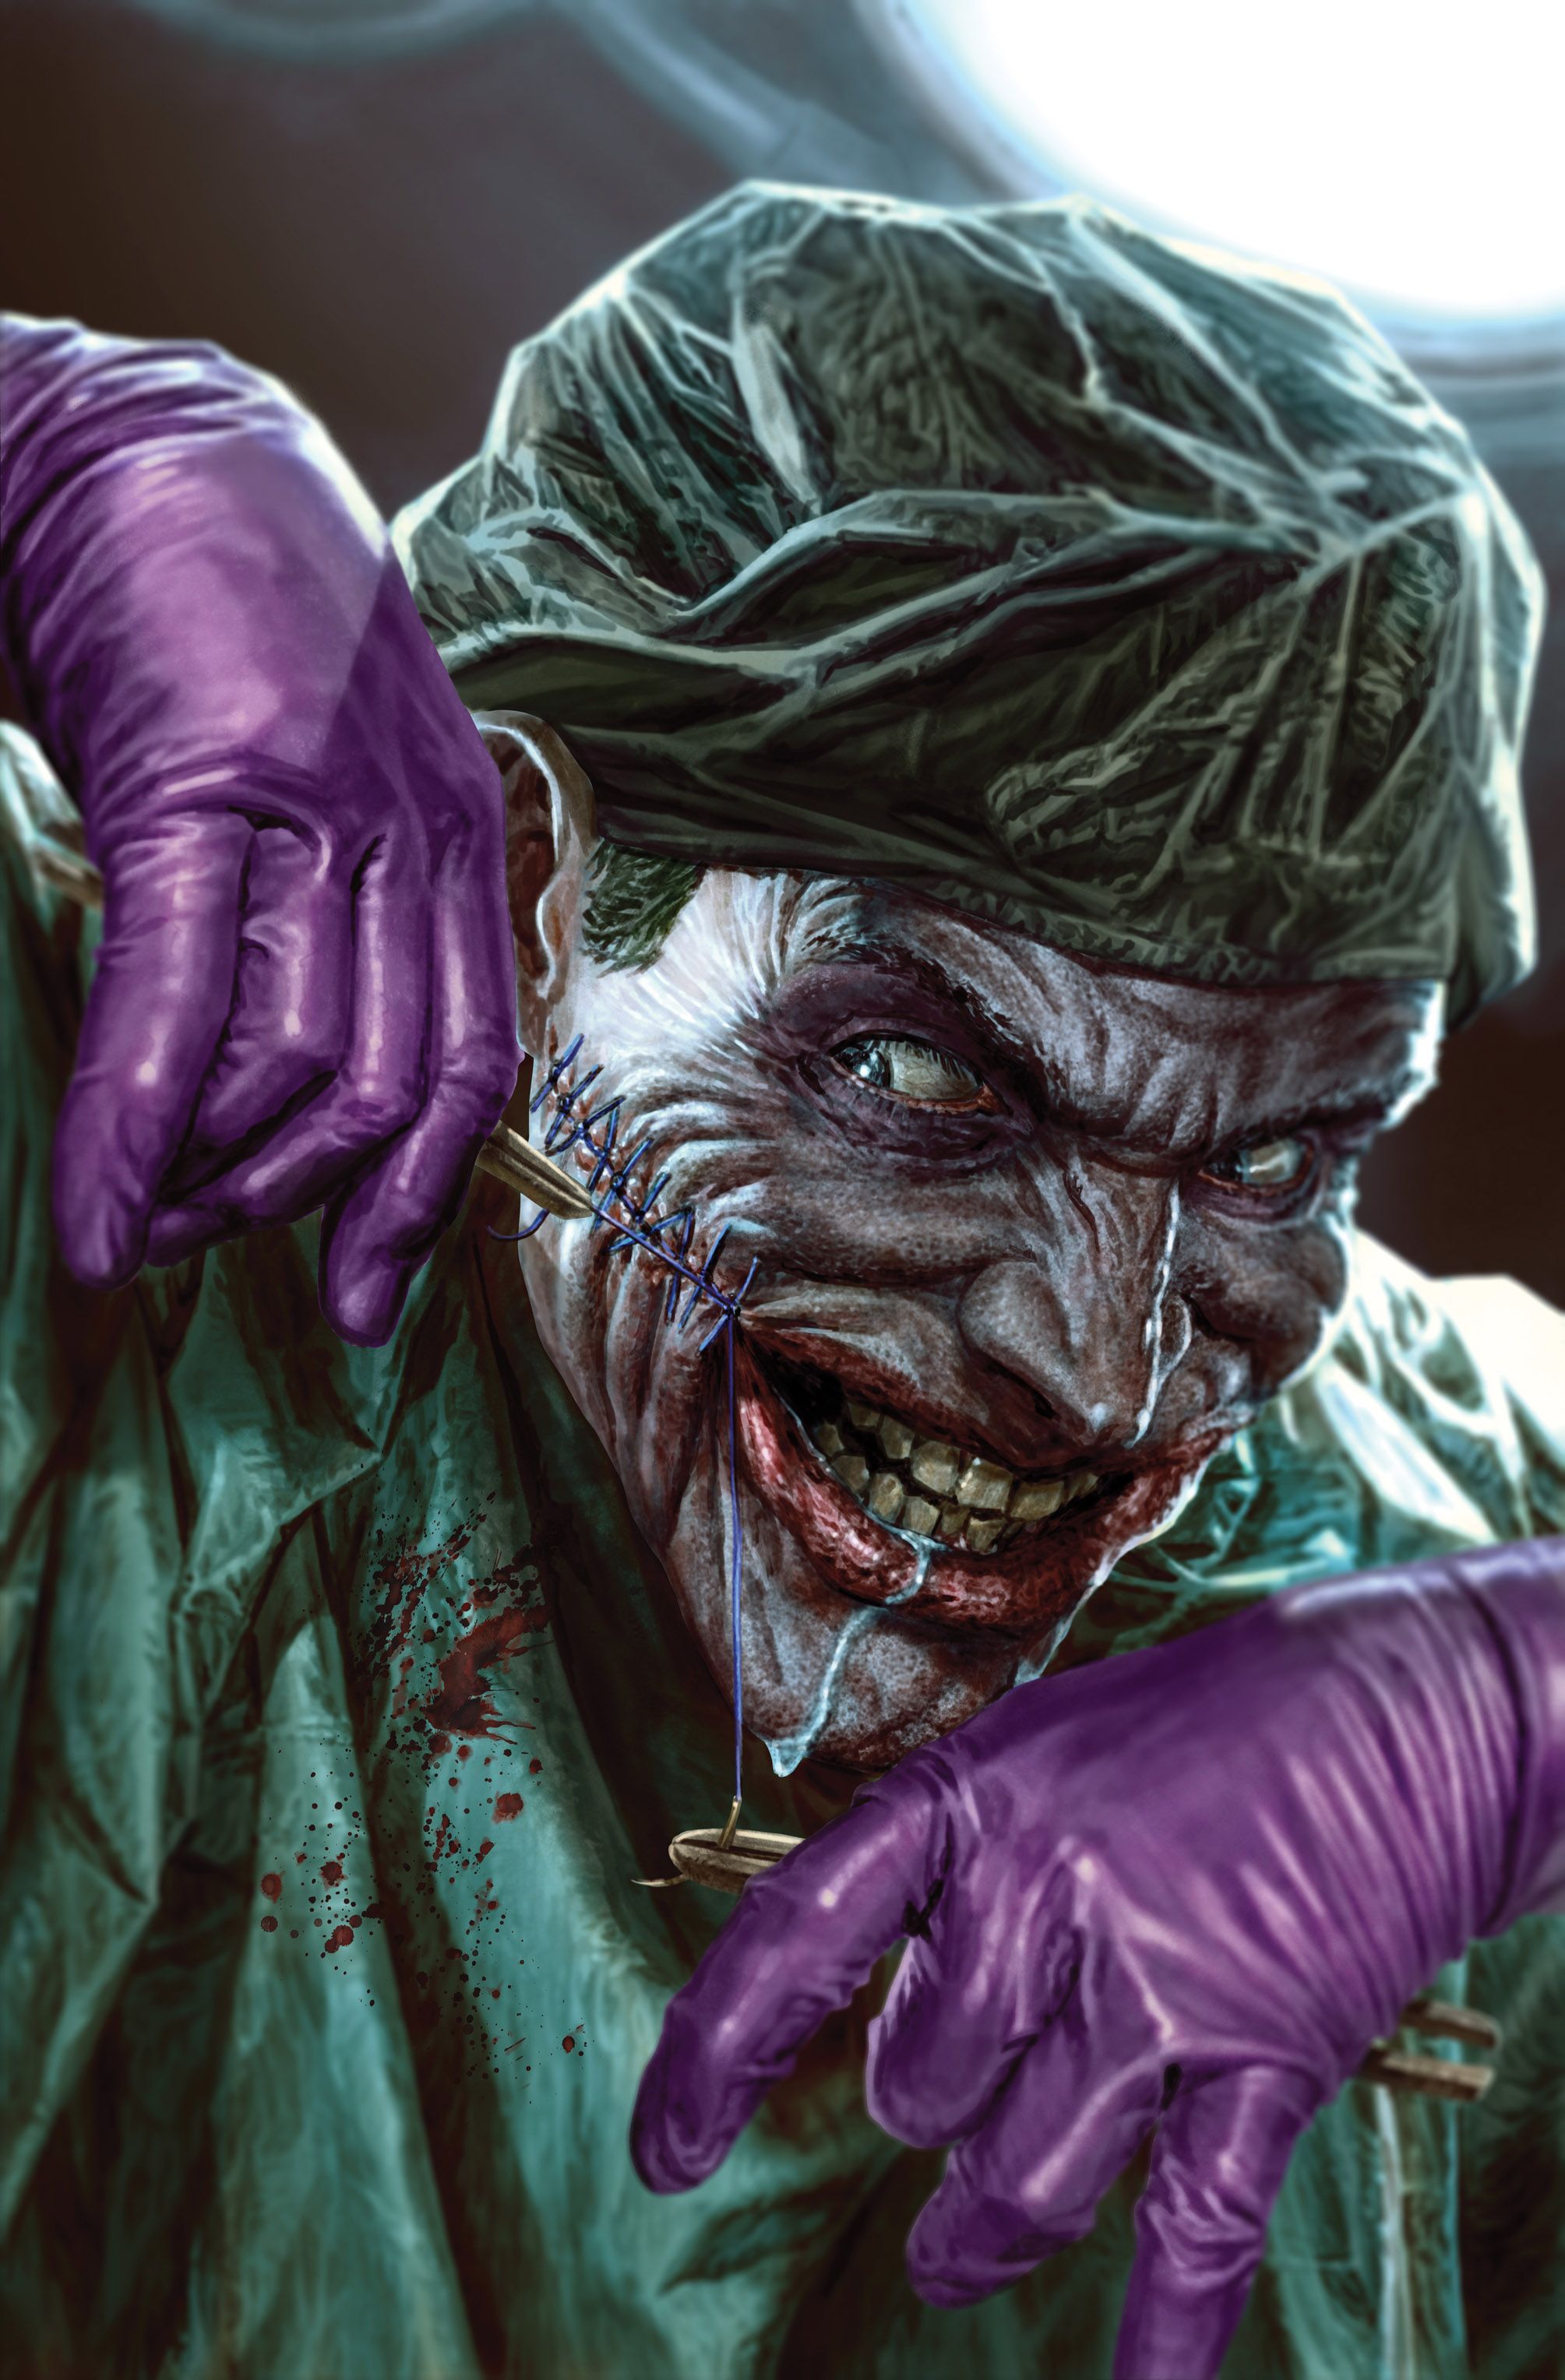 The Joker The Man Who Stopped Laughing 6 Open to Order Variant (Bermejo)